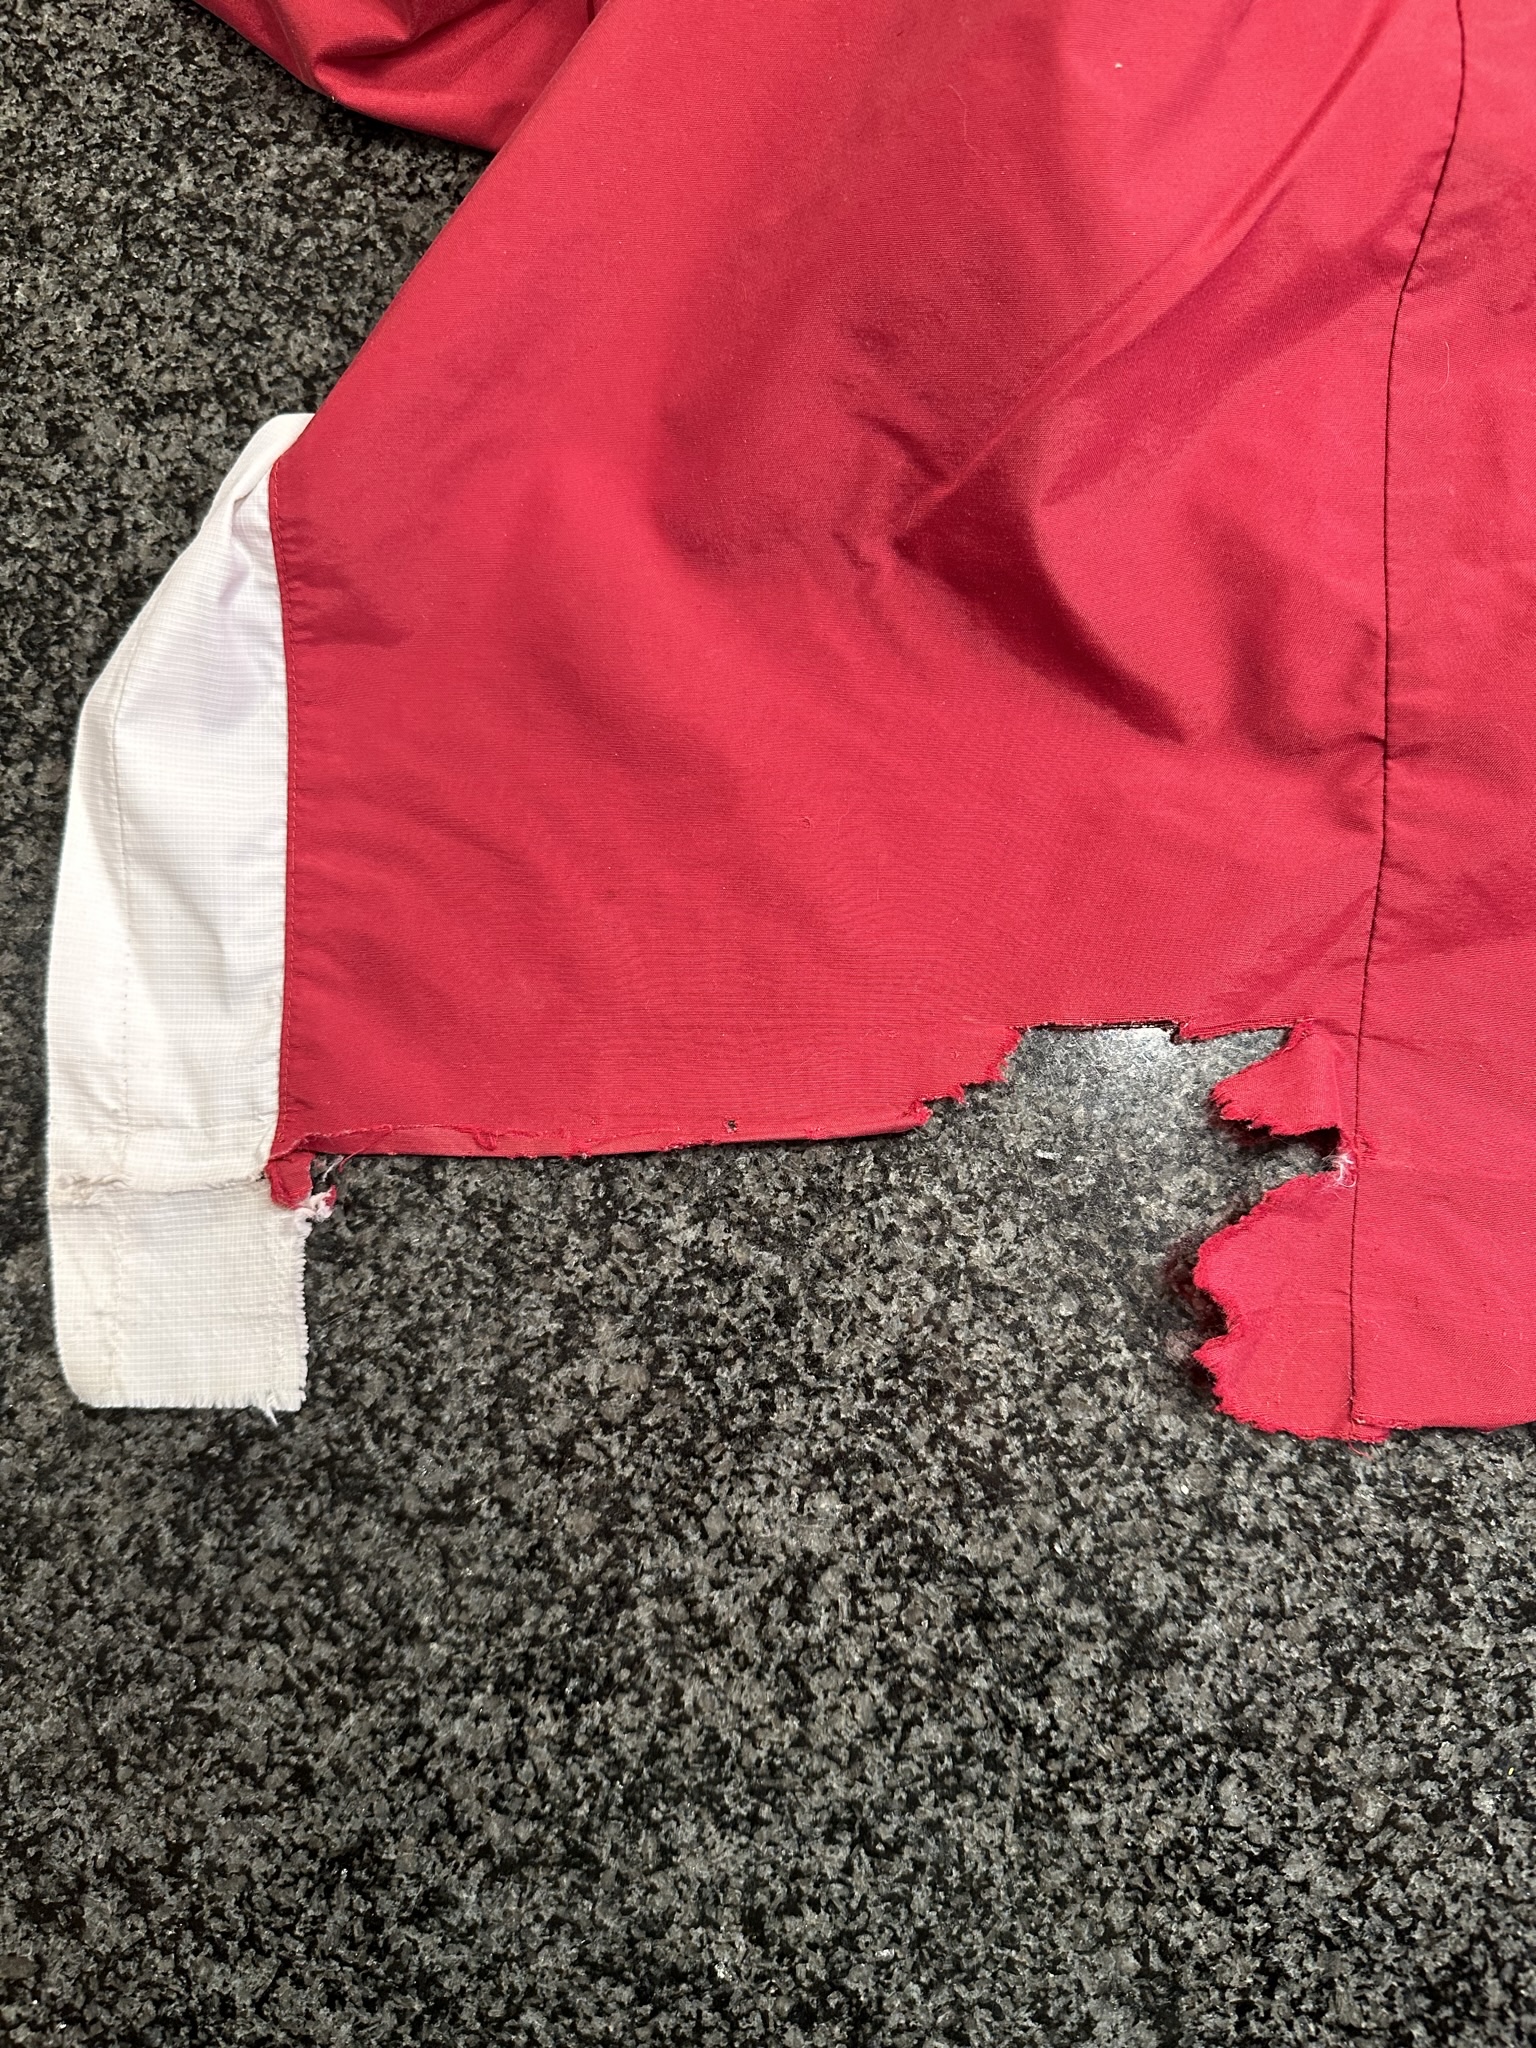 9611, original tear in athletic pants how to fix a ripped pant